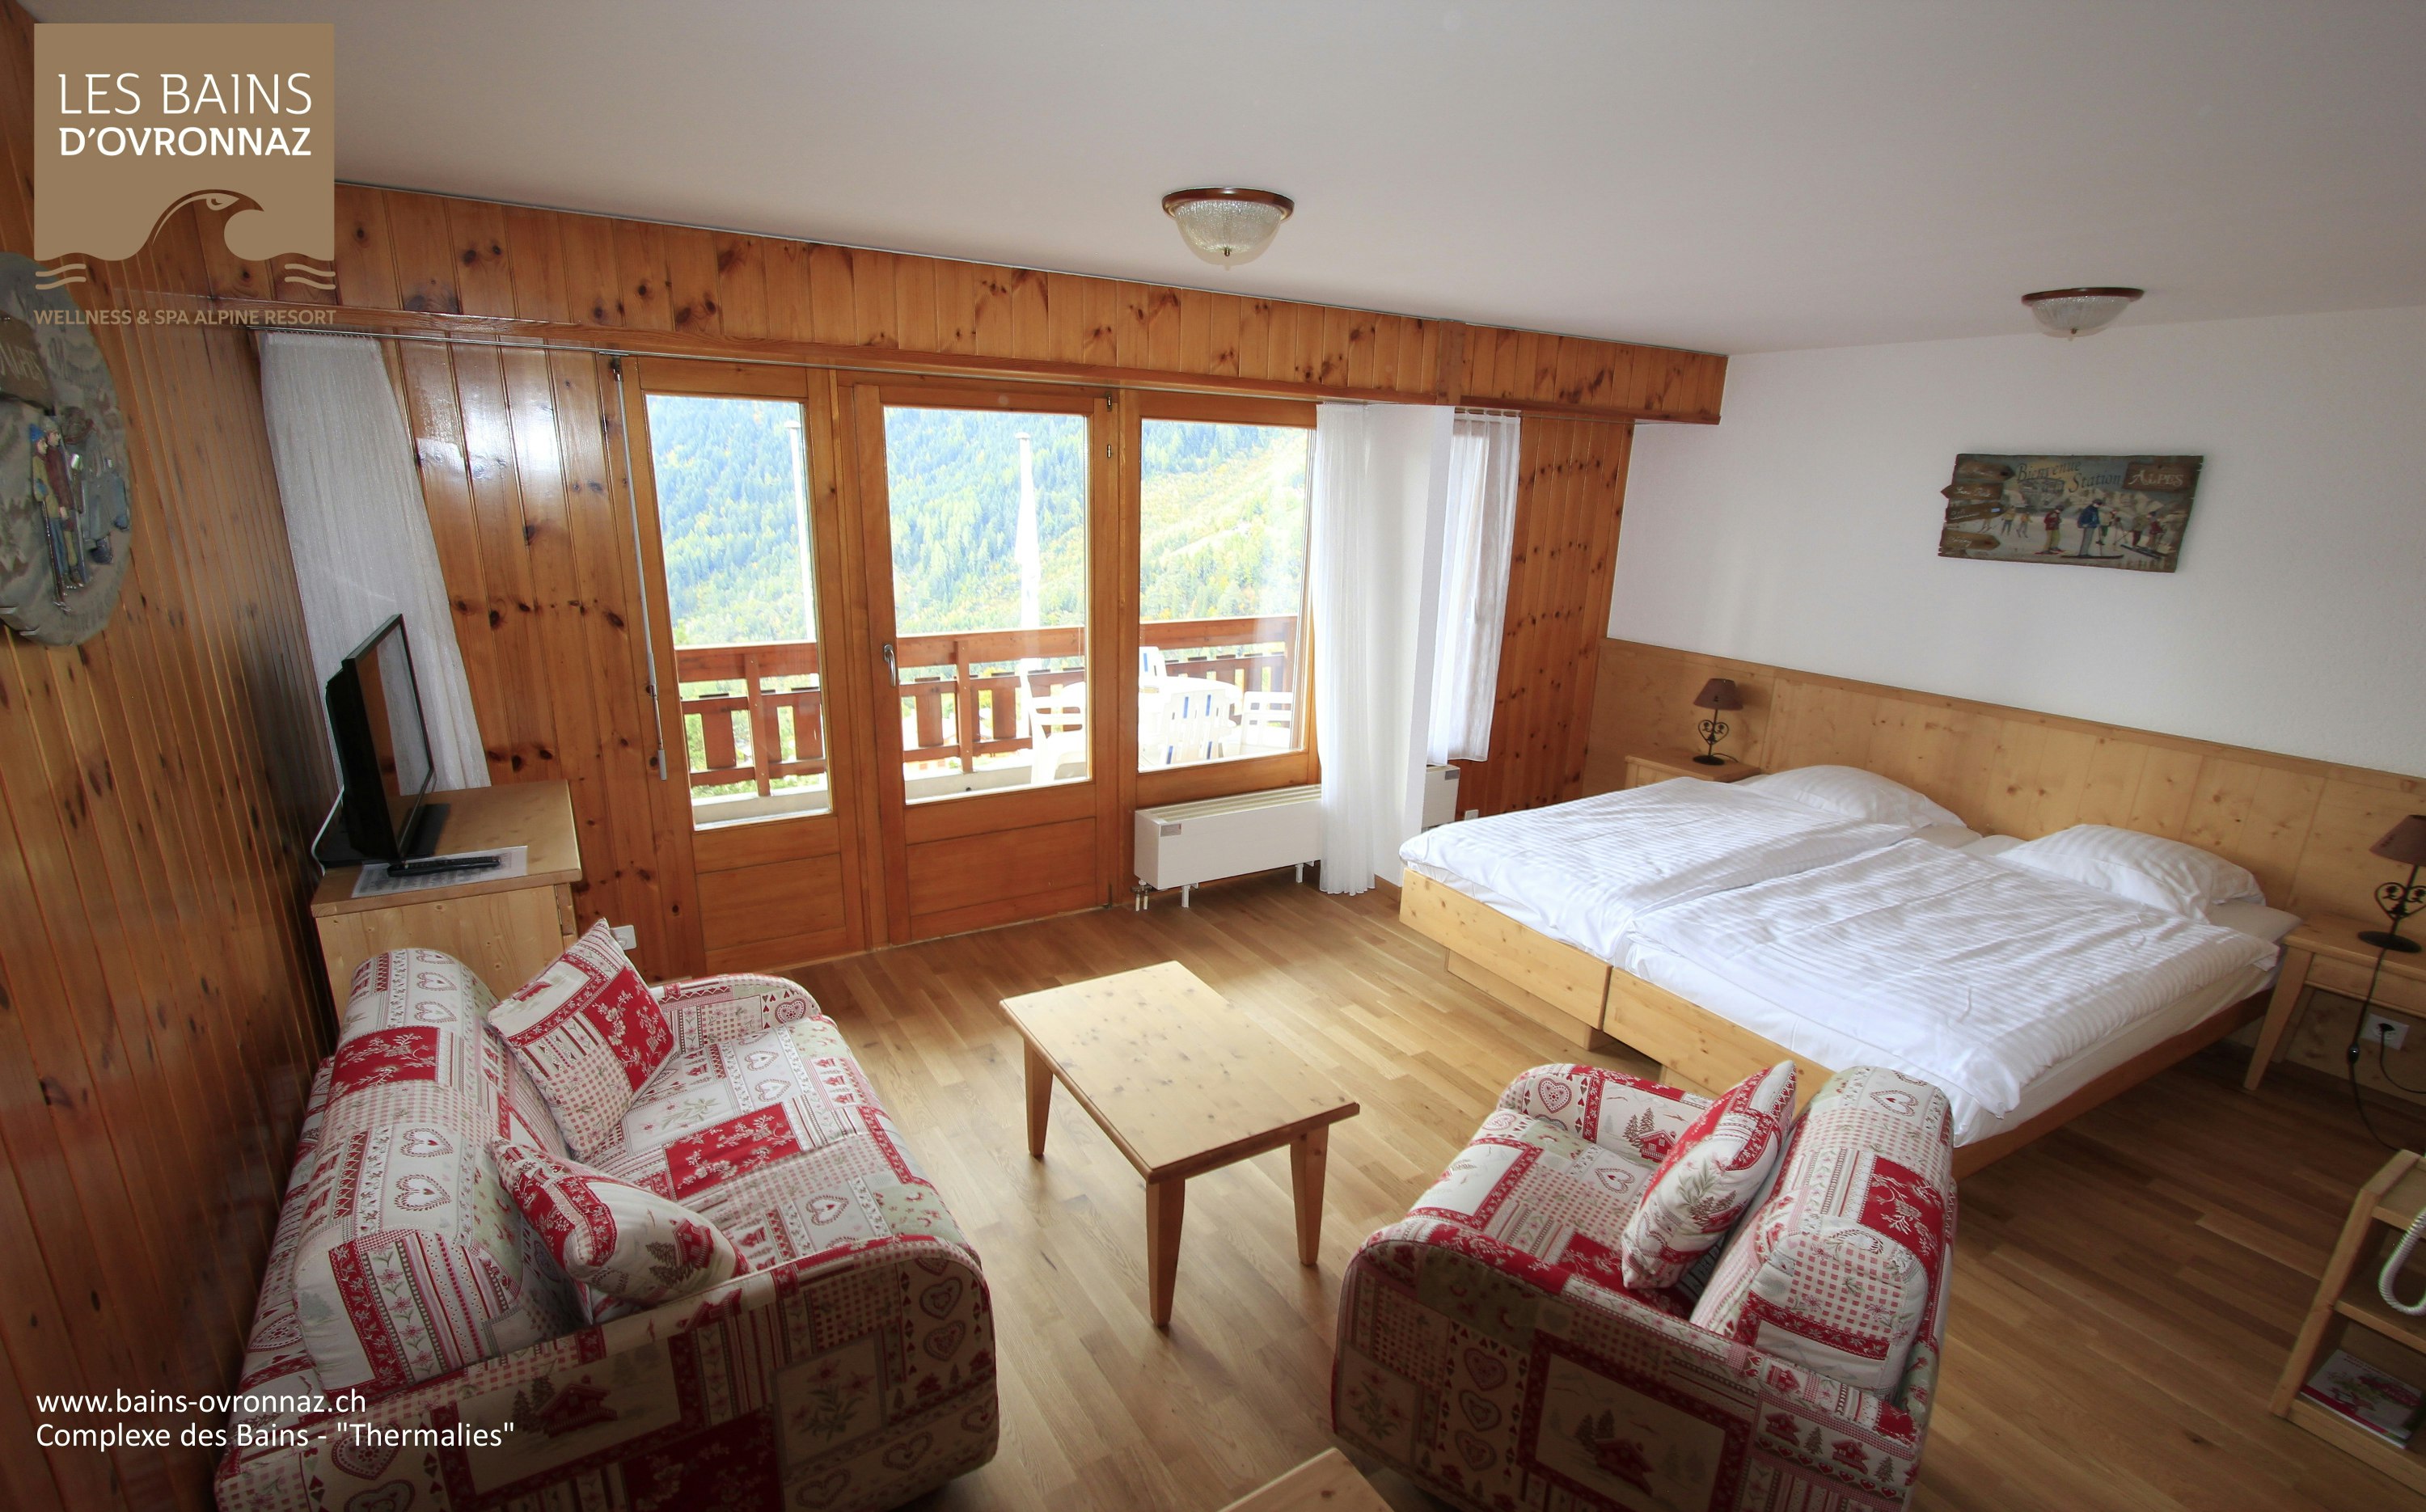 Relax package<br>
Hotel des Bains d'Ovronnaz<br>